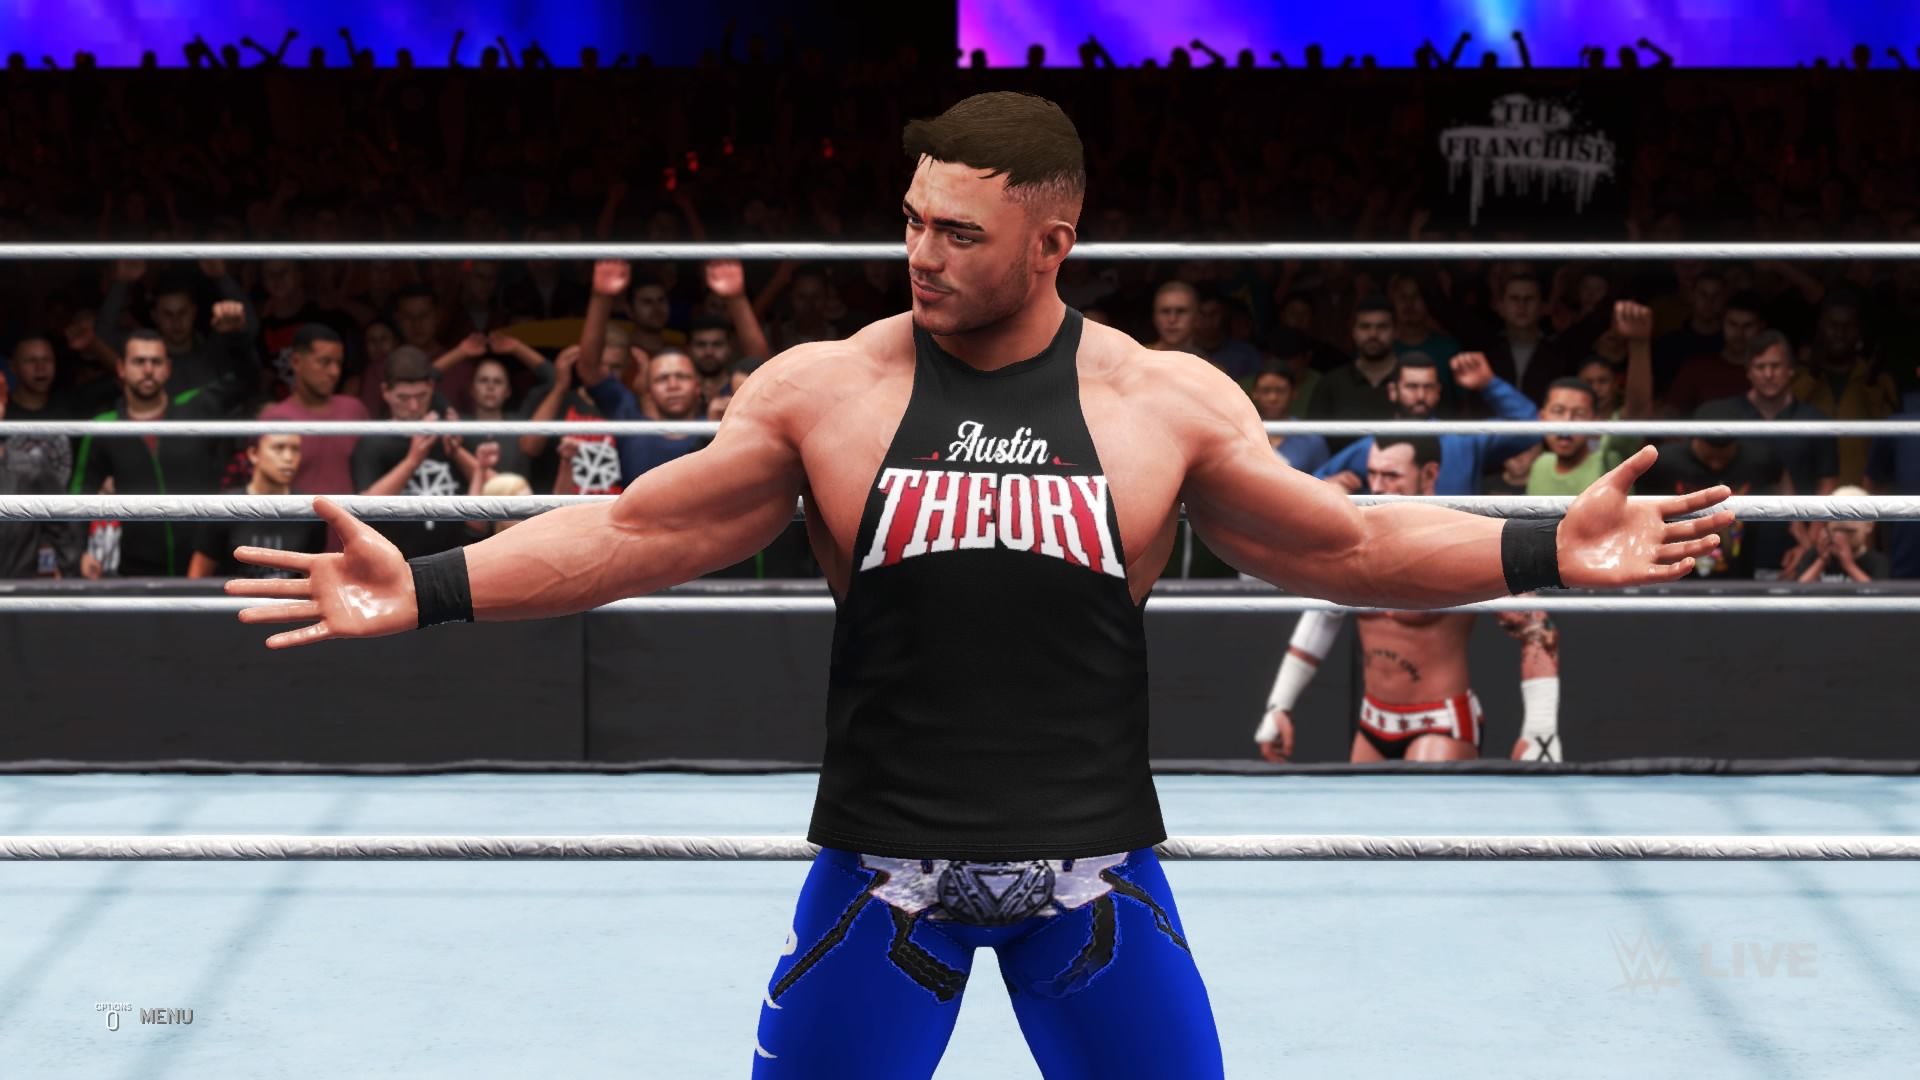 WWE 2K21 isn't happening but 2K promises other news soon